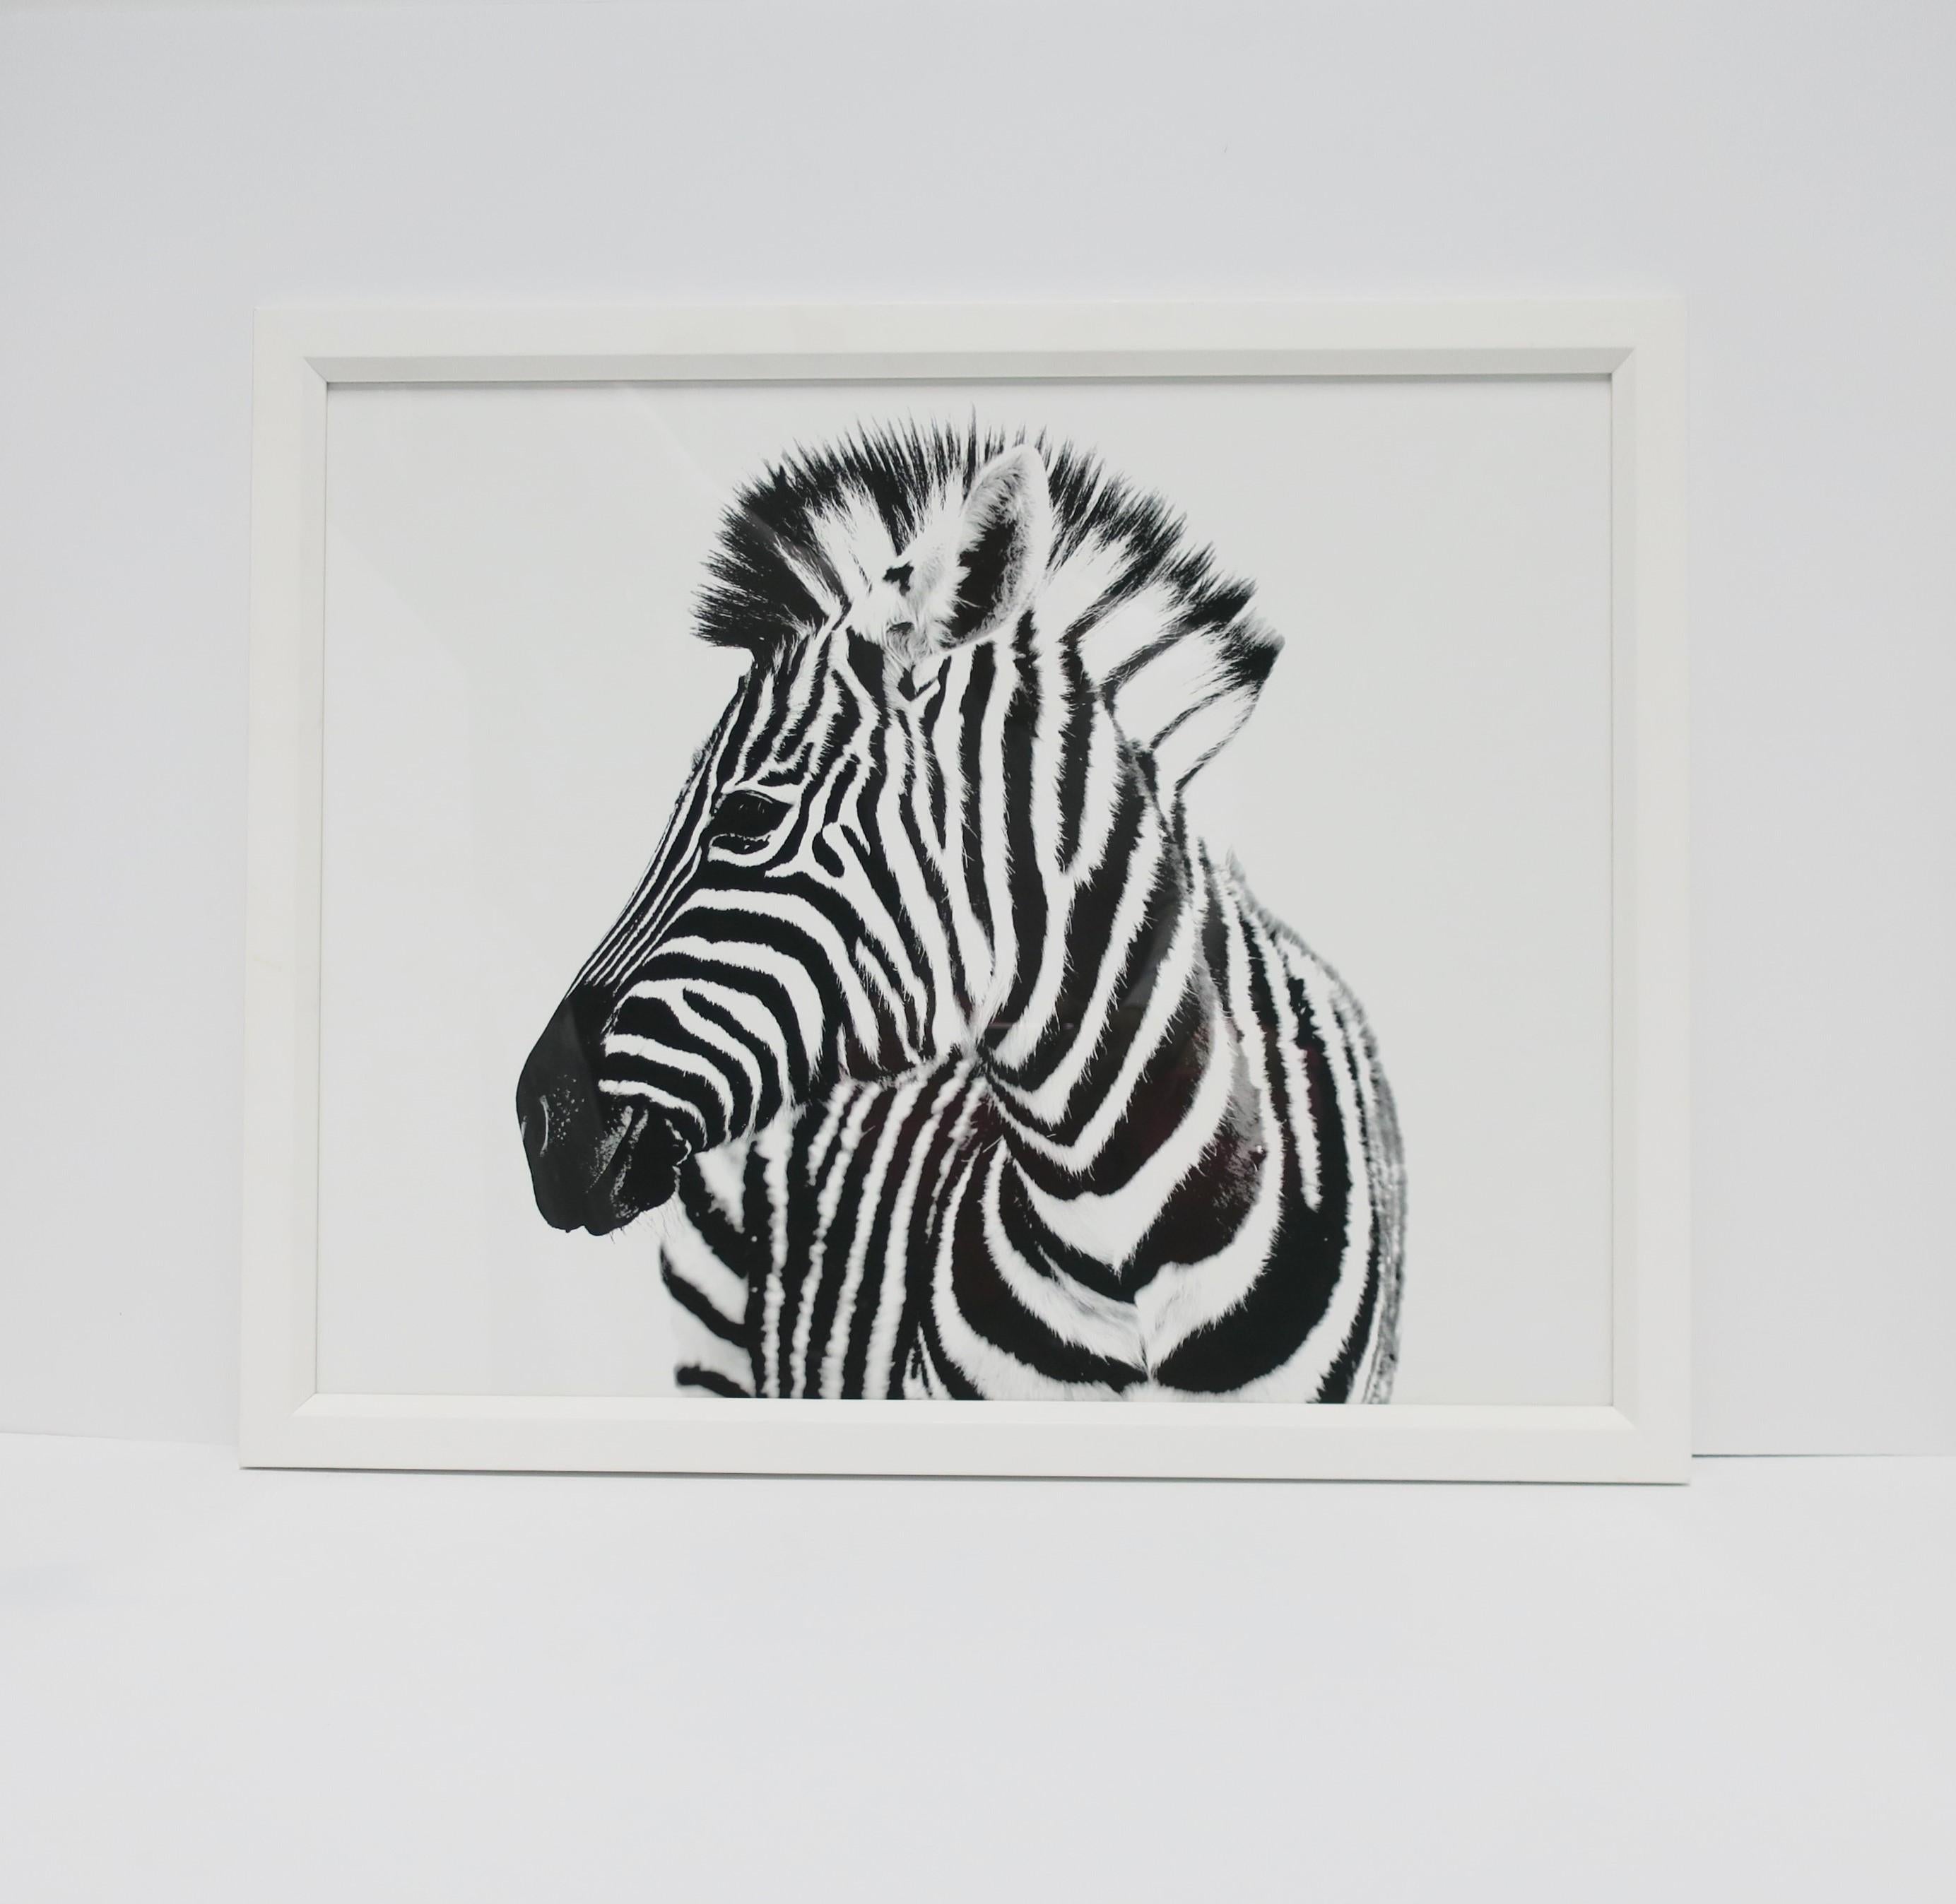 A black and white zebra animal photo print with white handcrafted frame, from London-based gallery, William Stafford, circa 21st century, England. This London-based gallery features Fine Art reproduction prints, contemporary black and white